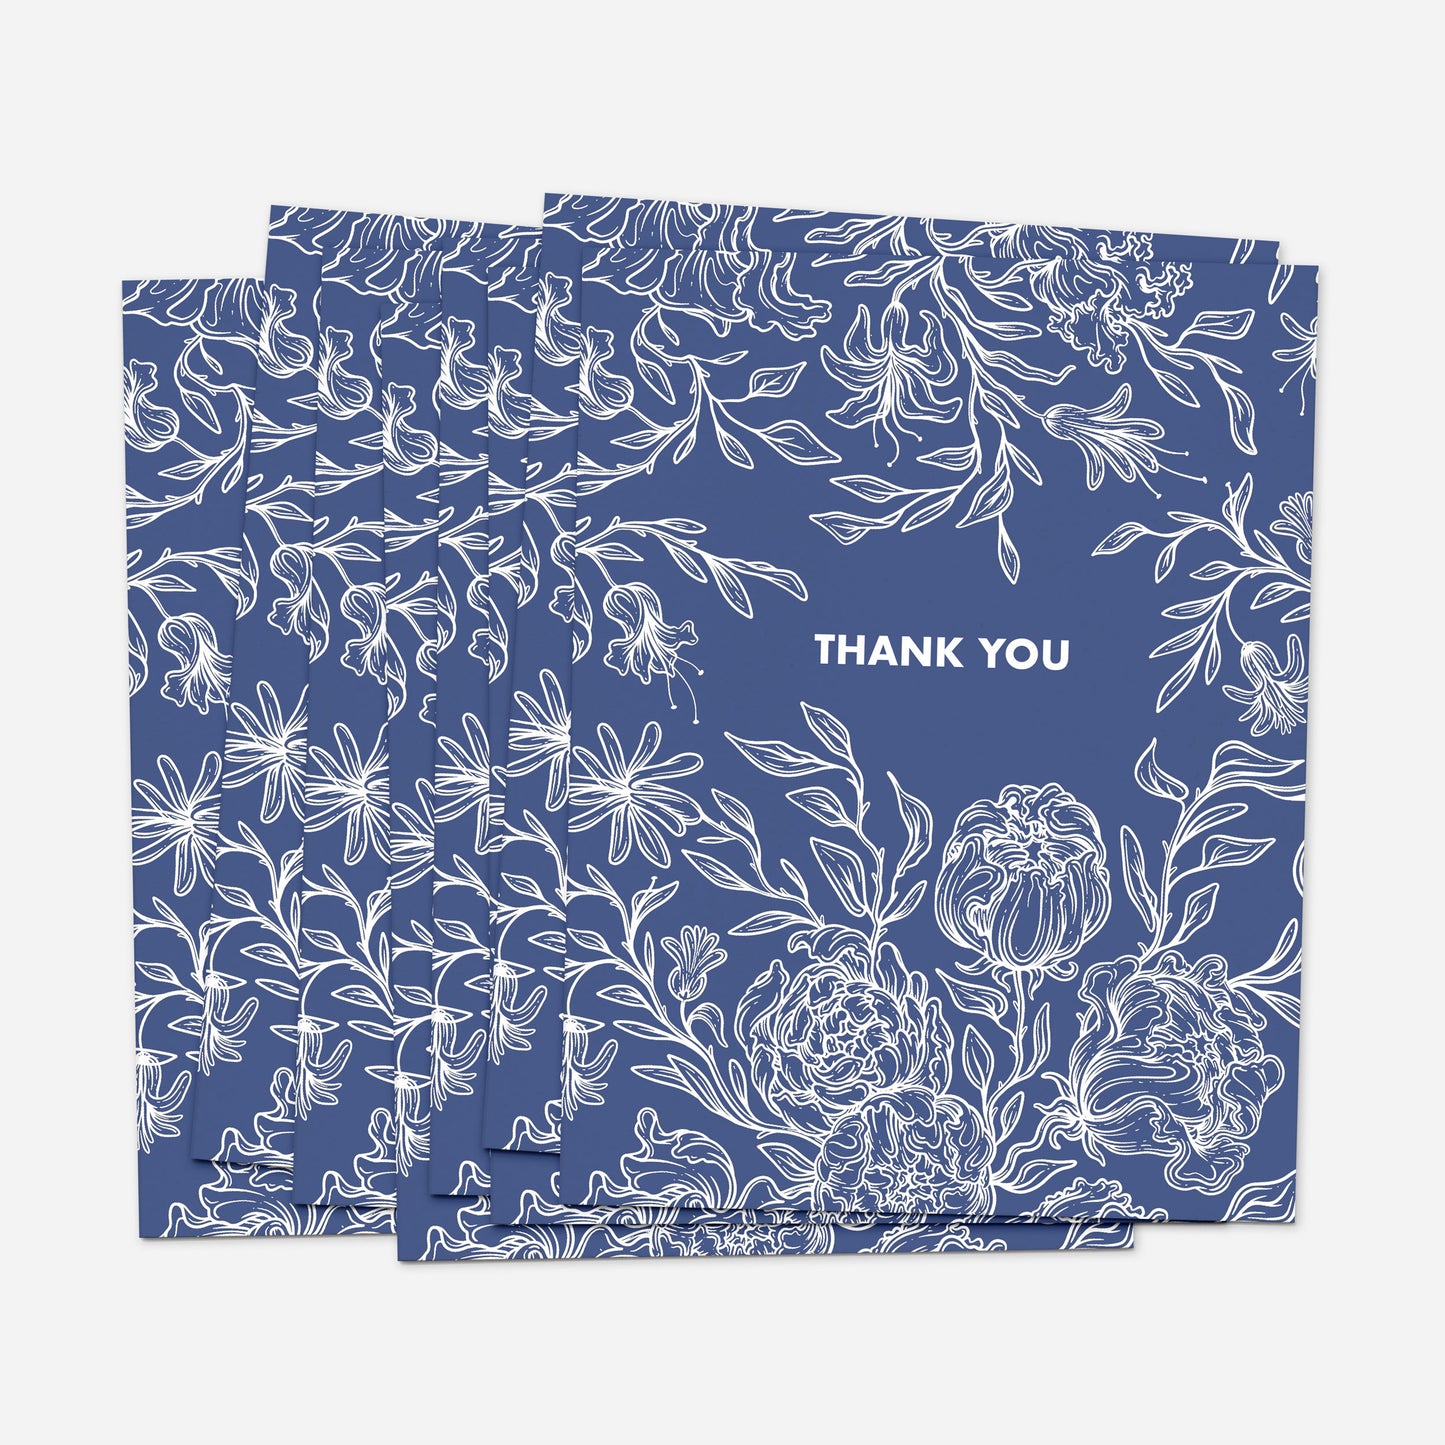 Set of 8 "Thank You" Greeting Cards